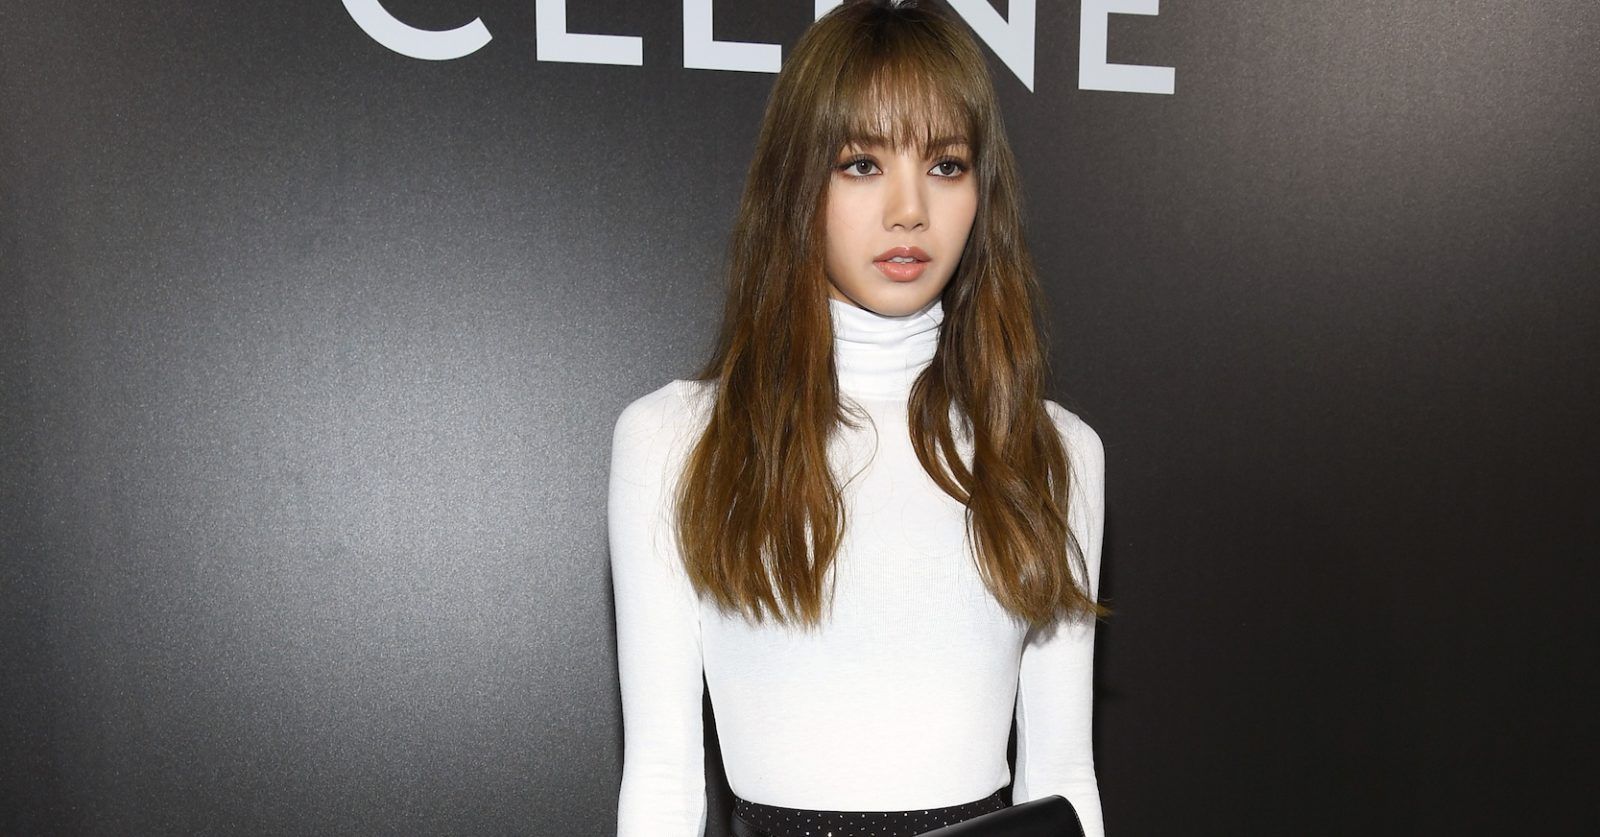 What will Lisa wear next? Find out at the Celine fashion show today